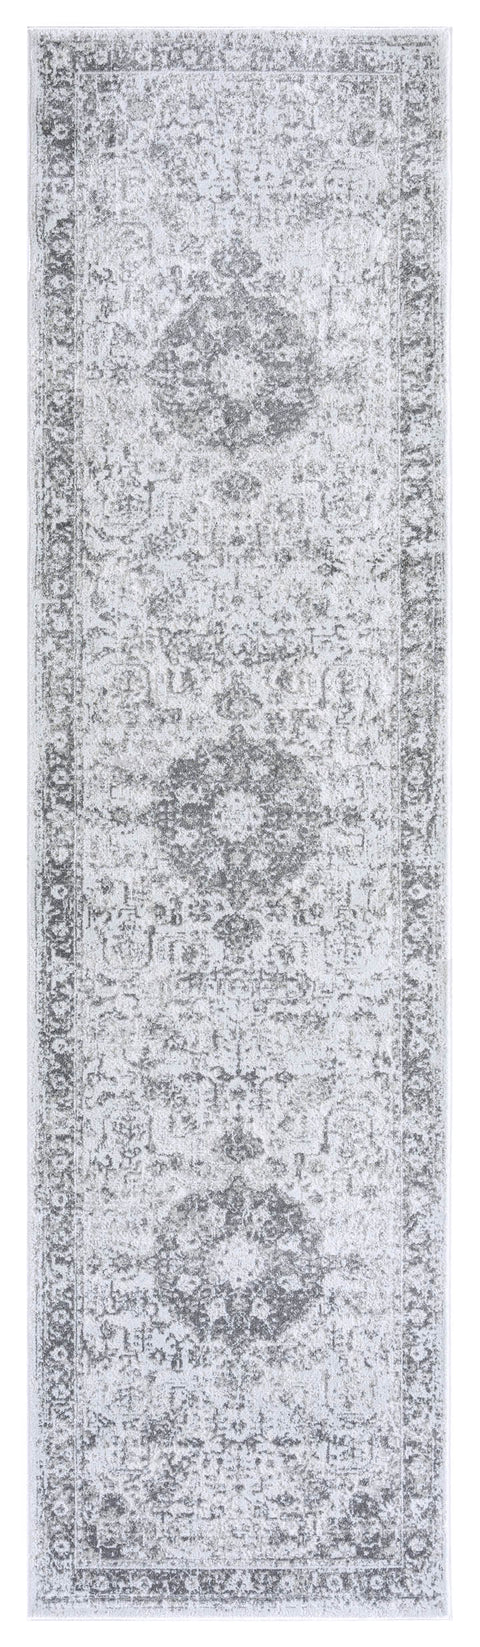 Cara Cream And Grey Transitional Medallion Runner Rug *NO RETURNS UNLESS FAULTY